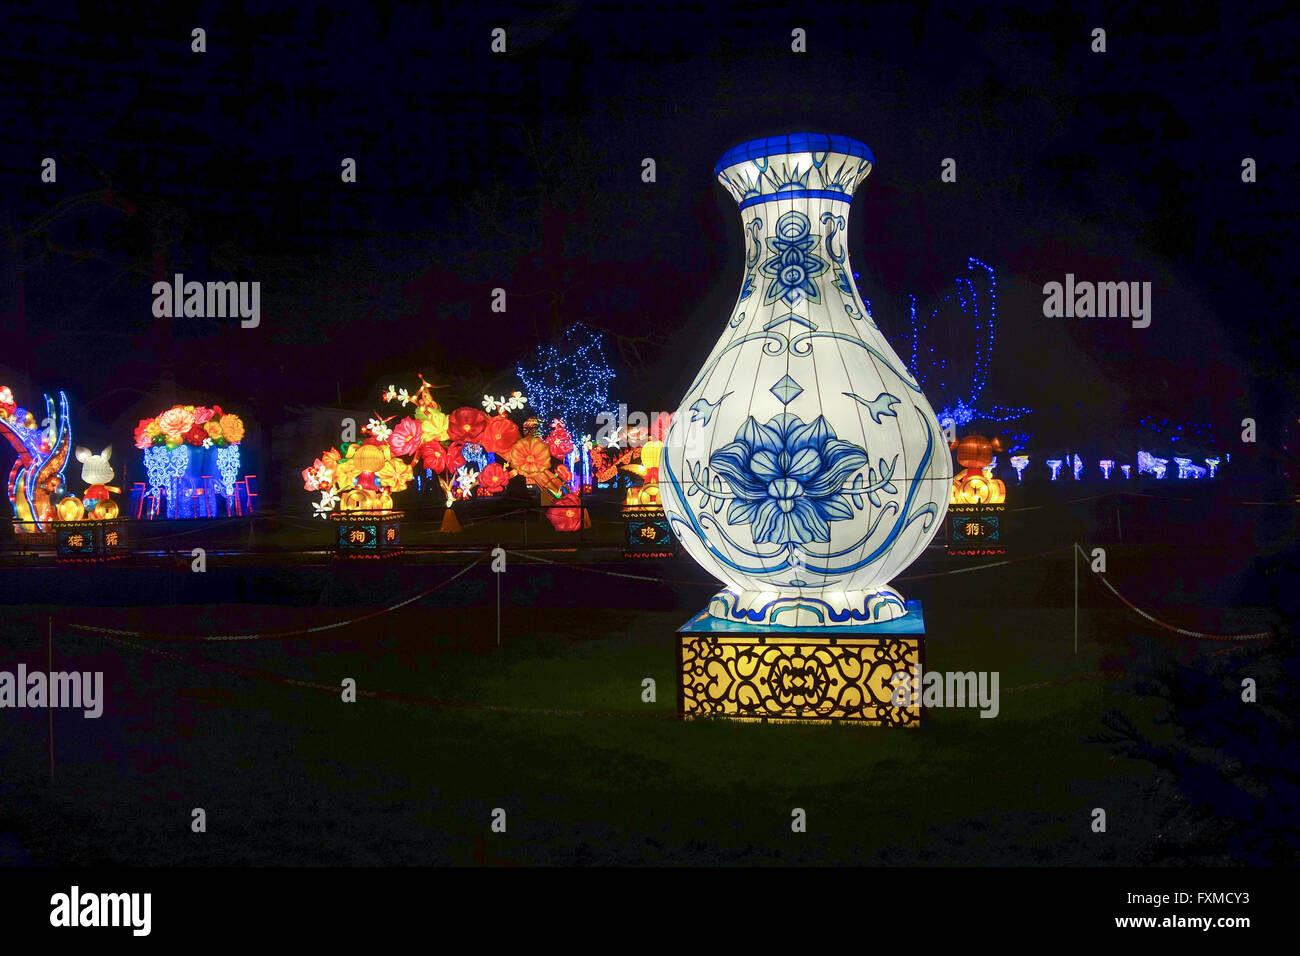 A traditional blue Oriental vase at the Magical Lantern Festival celebrates the Year of the Monkey at Chiswick Park in London. Stock Photo